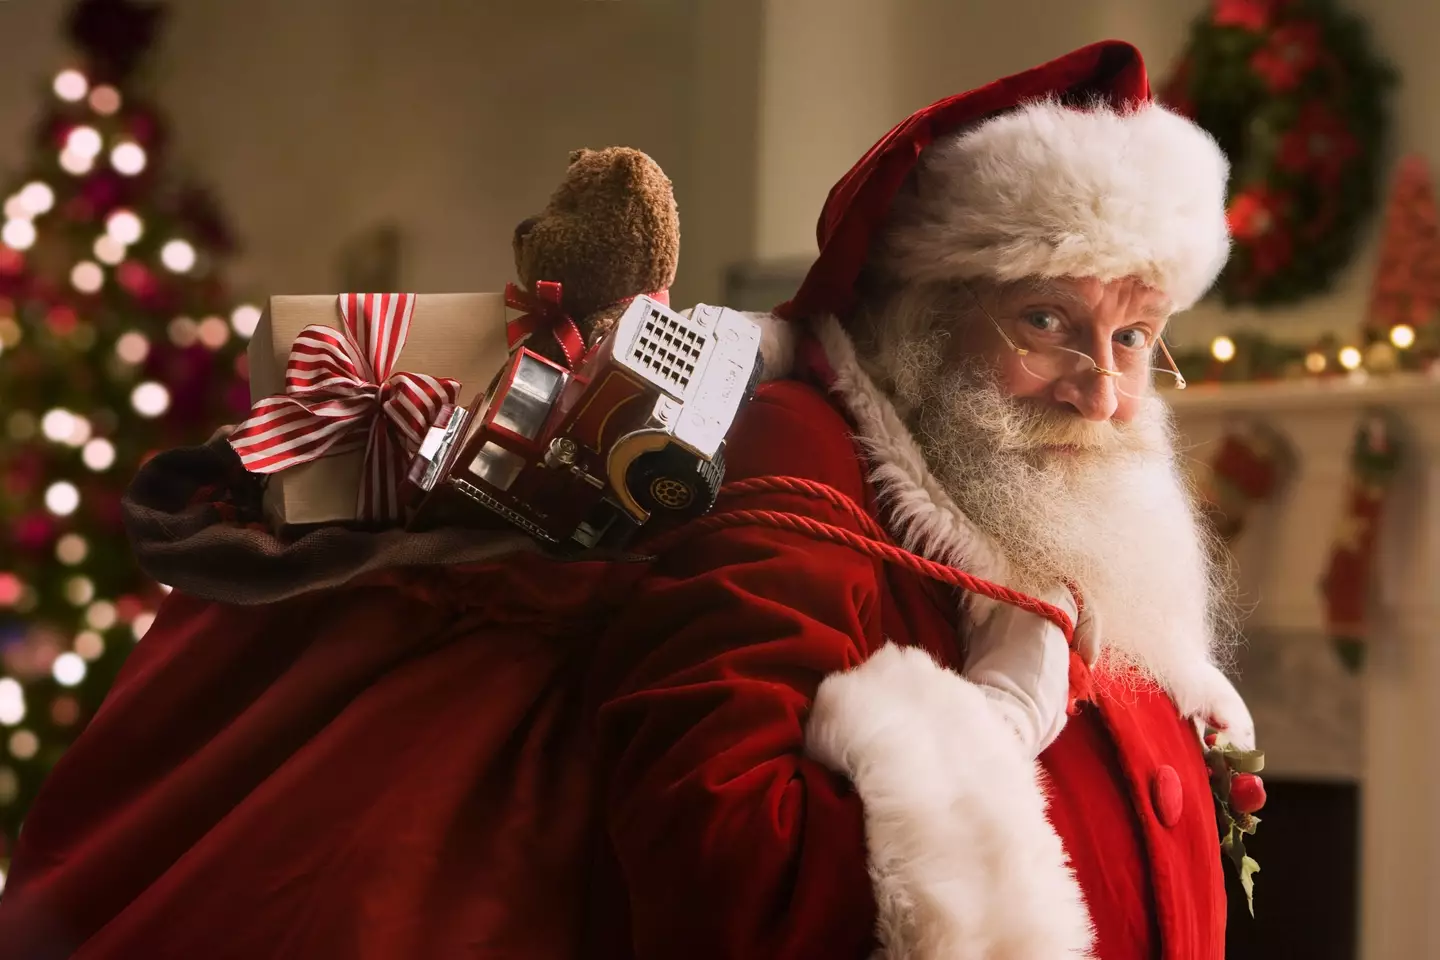 A mum has revealed that she refuses to lie to her children about Santa Claus.